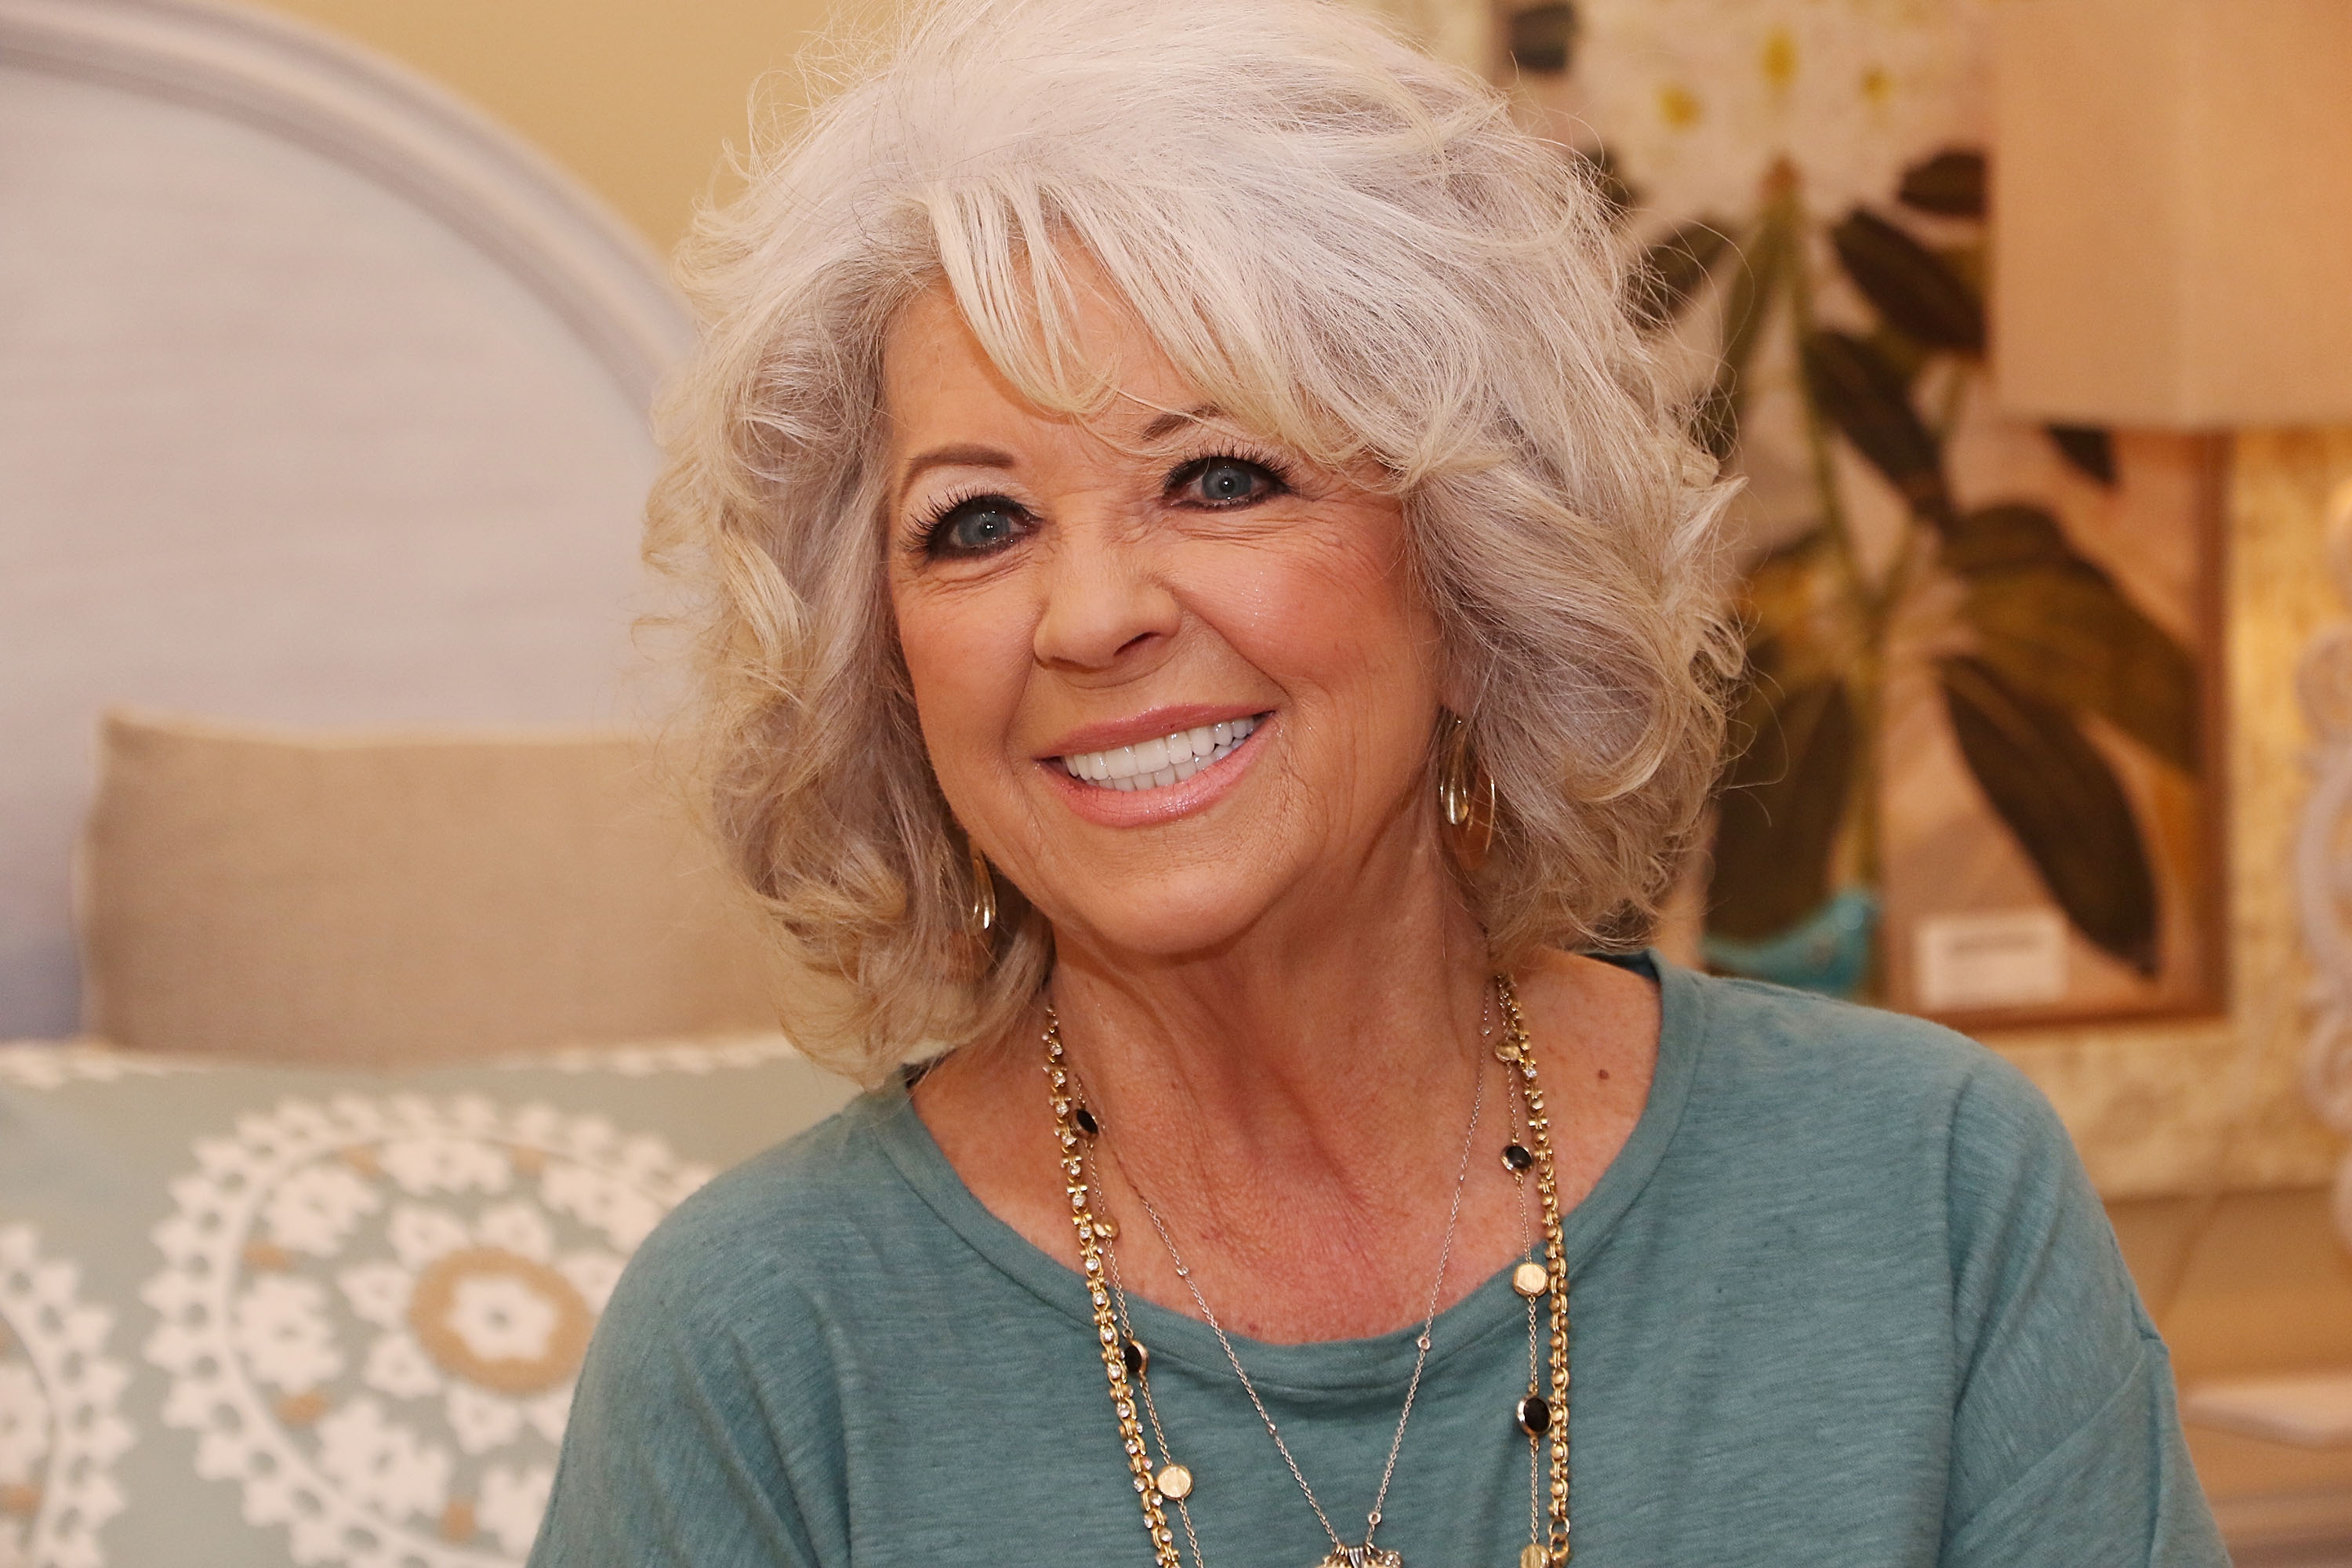 Paula Deen signs copies of her book during Cuts the Fat Book Tour on January 30, 2016. | Source: Getty Images